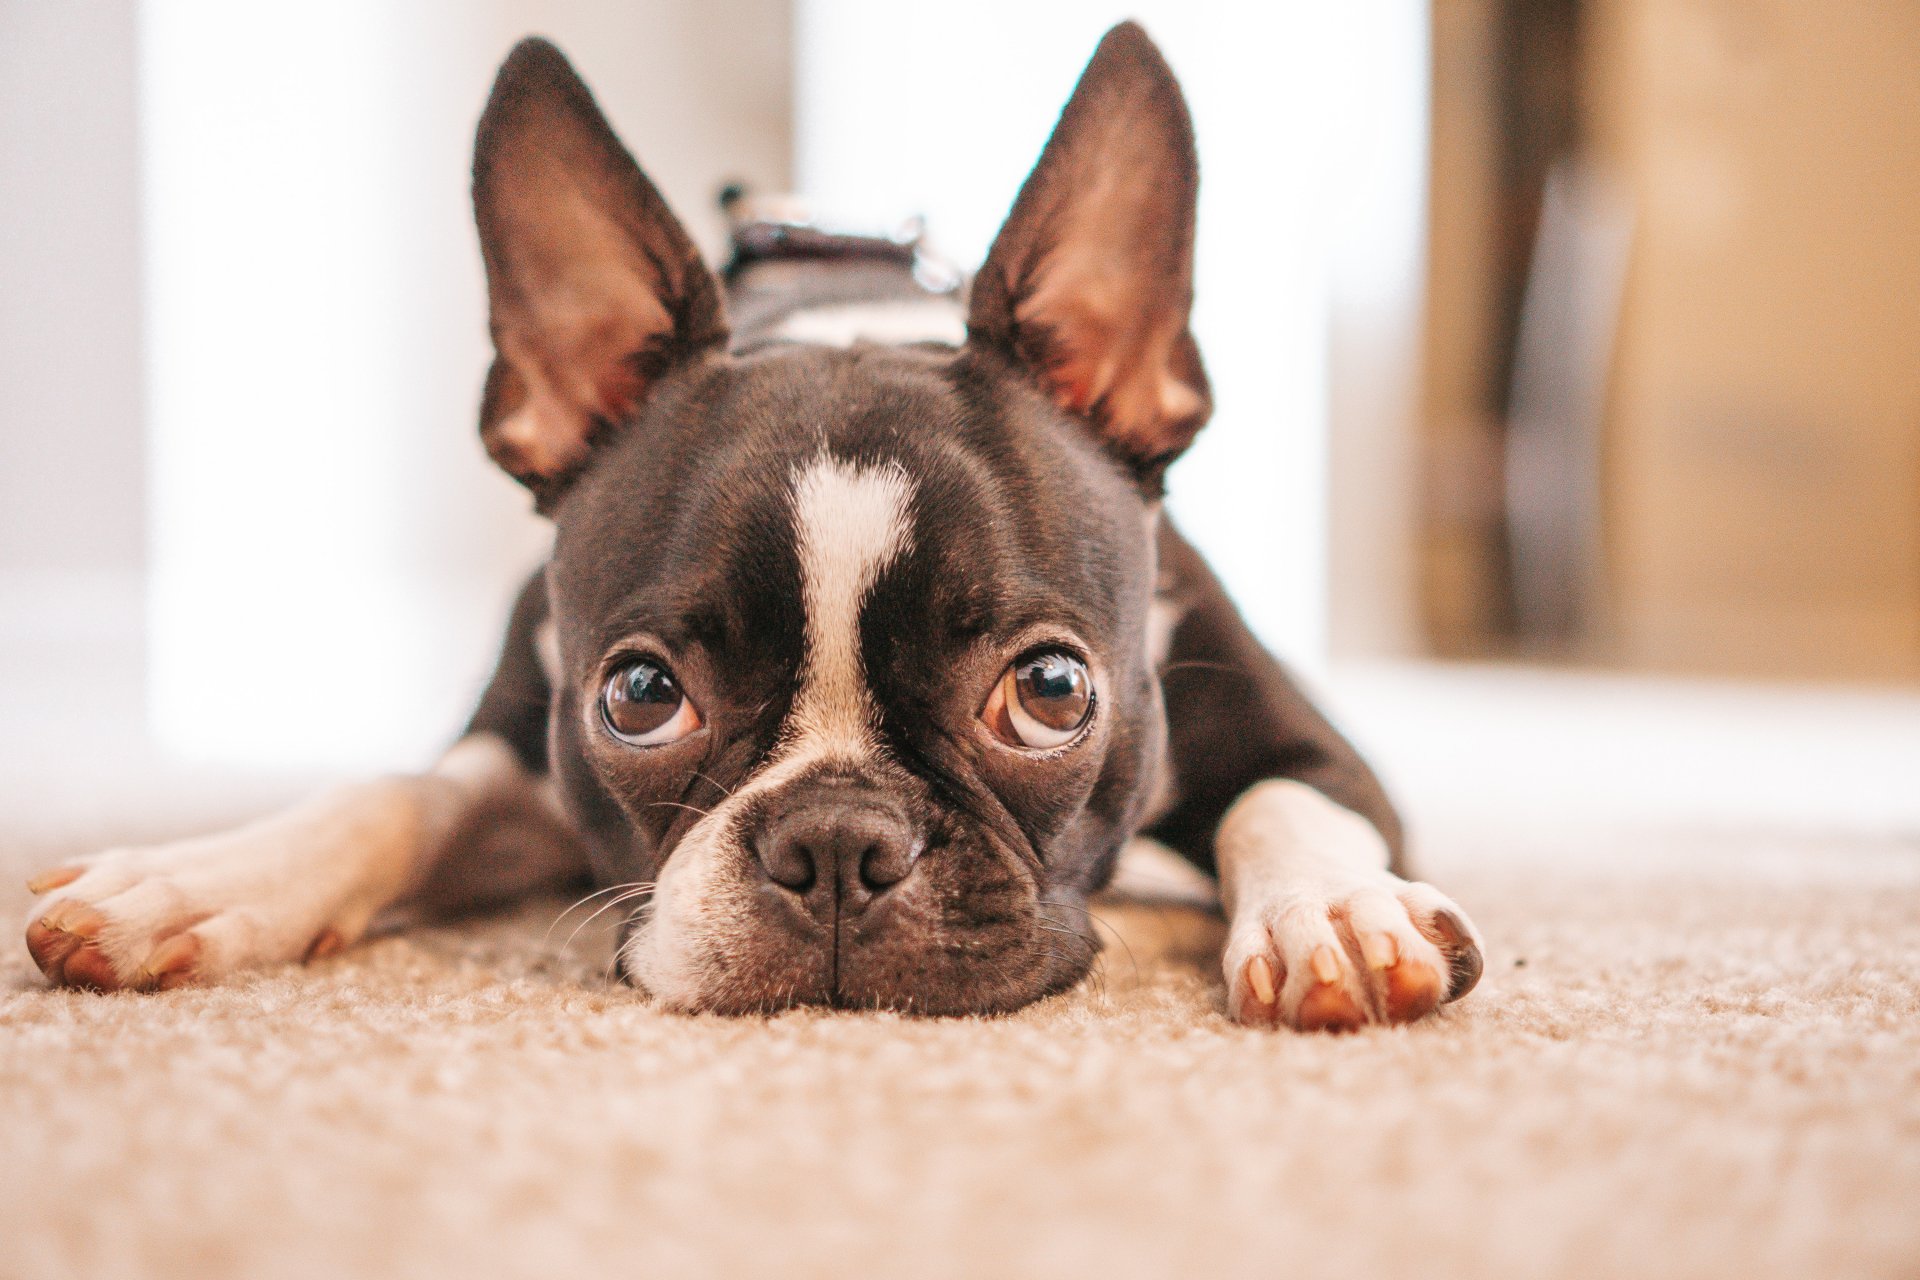 About the Boston Terrier dog breed